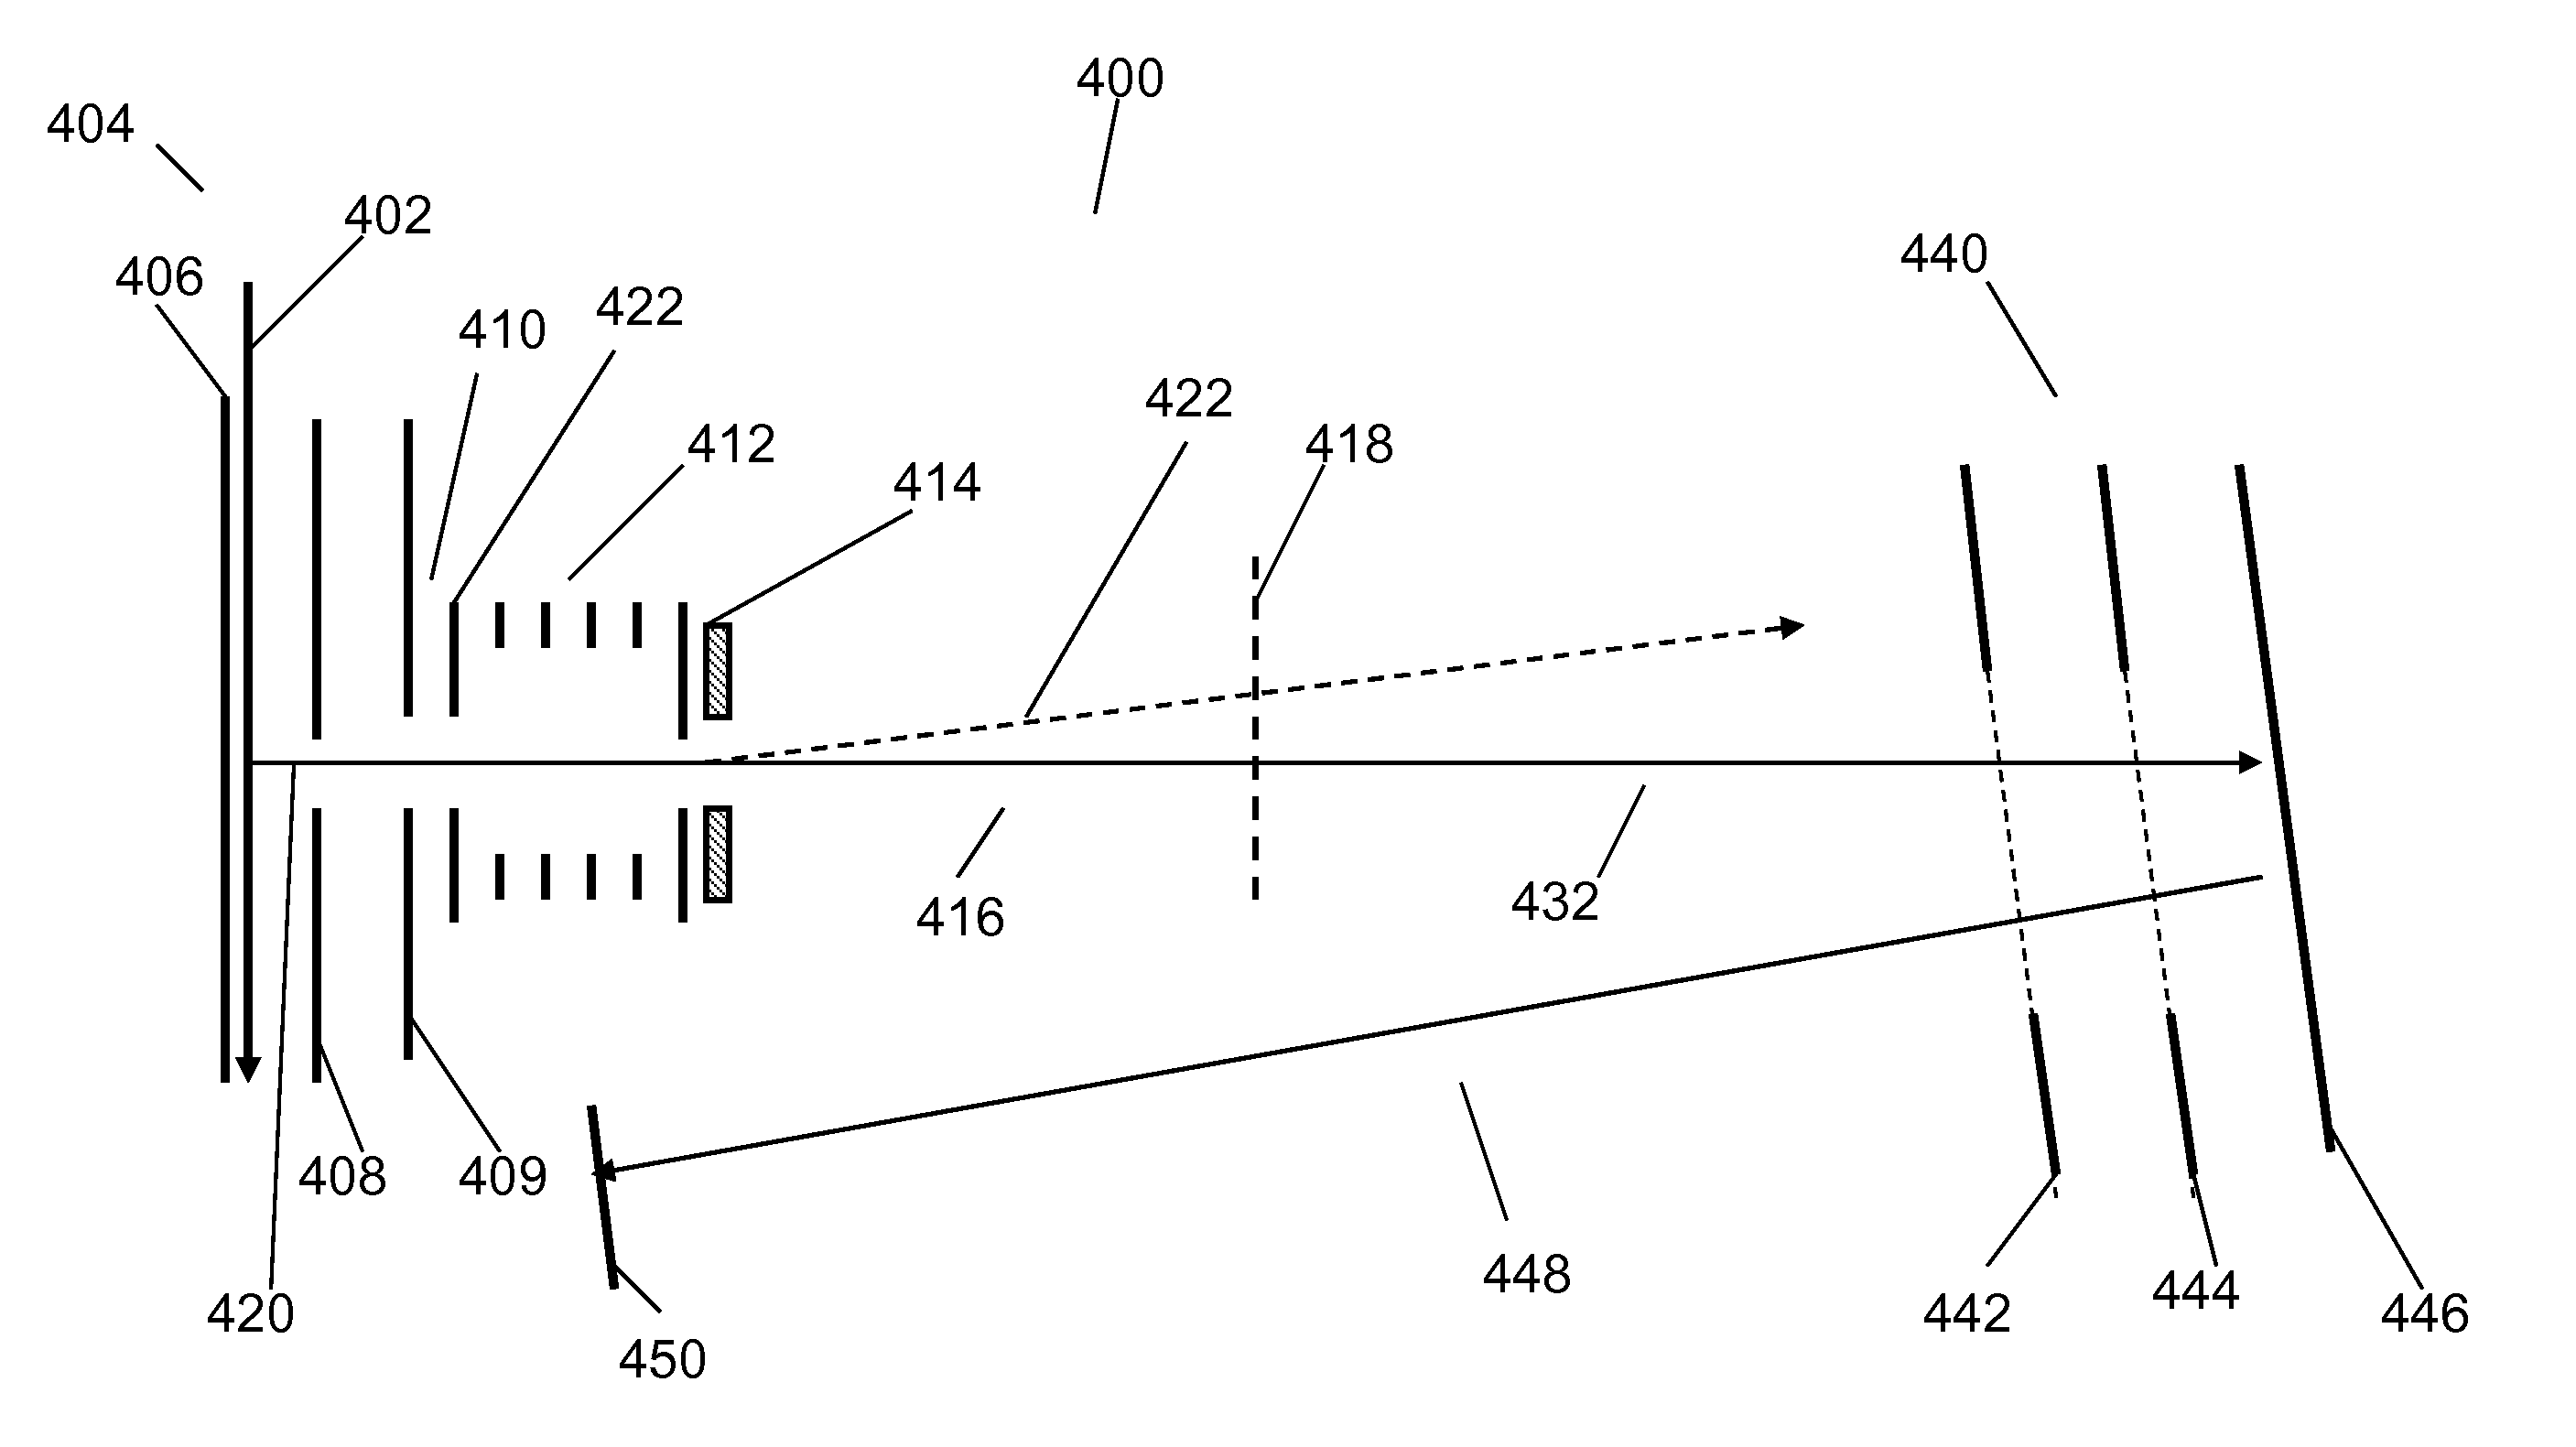 Reflector Time-of-Flight Mass Spectrometry with Simultaneous Space and Velocity Focusing